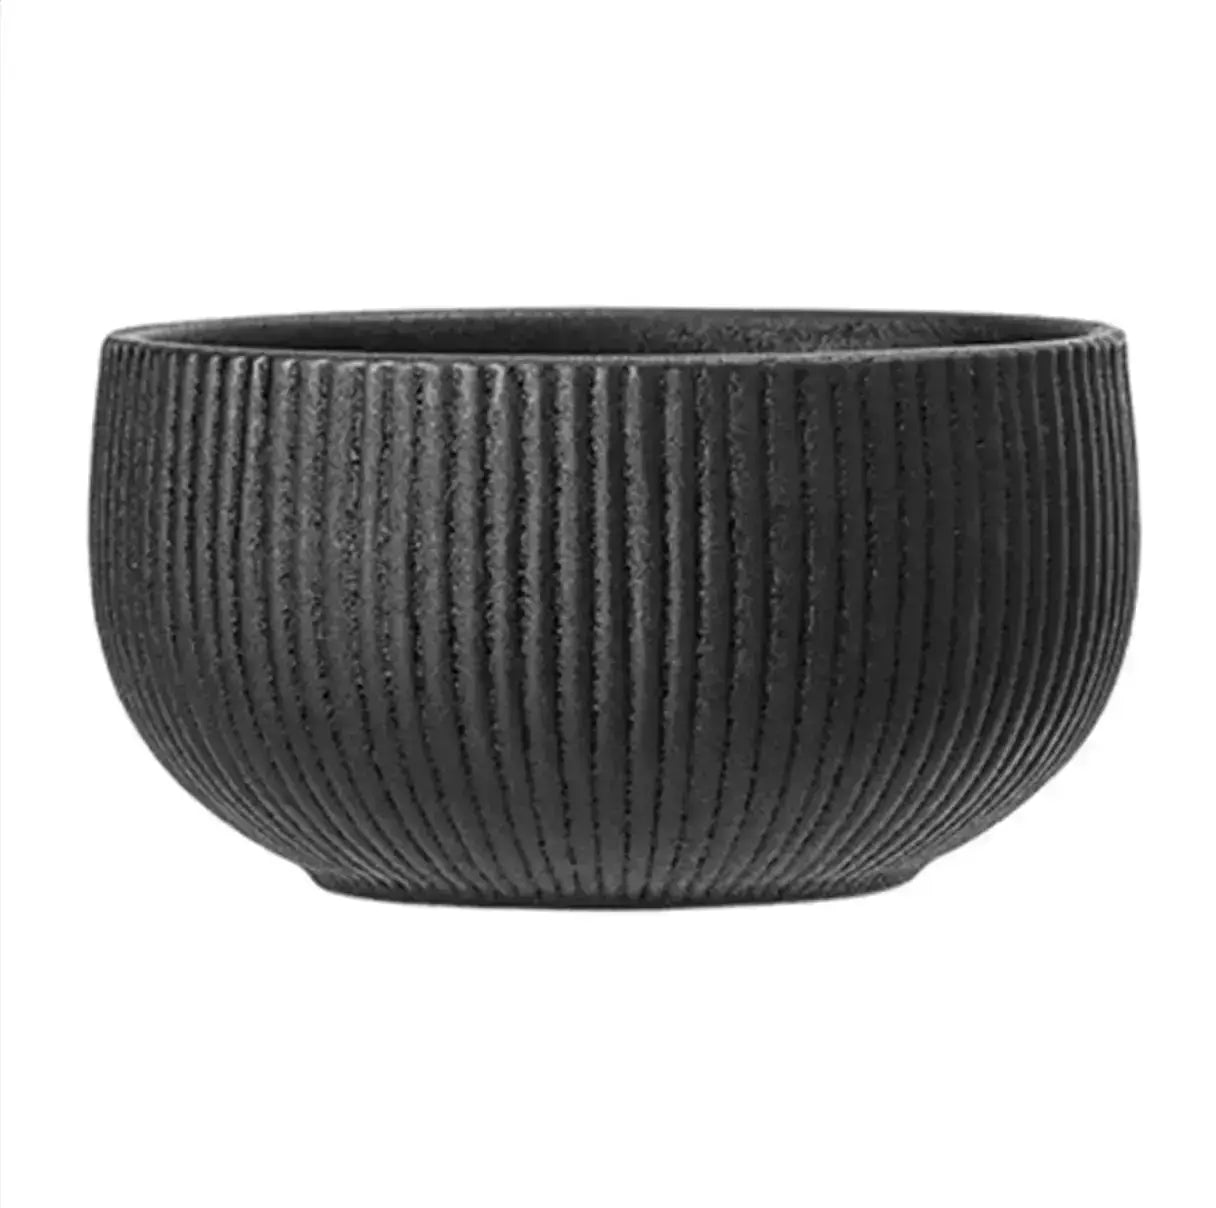 A French Bazaar Neri Bowl on a white background.